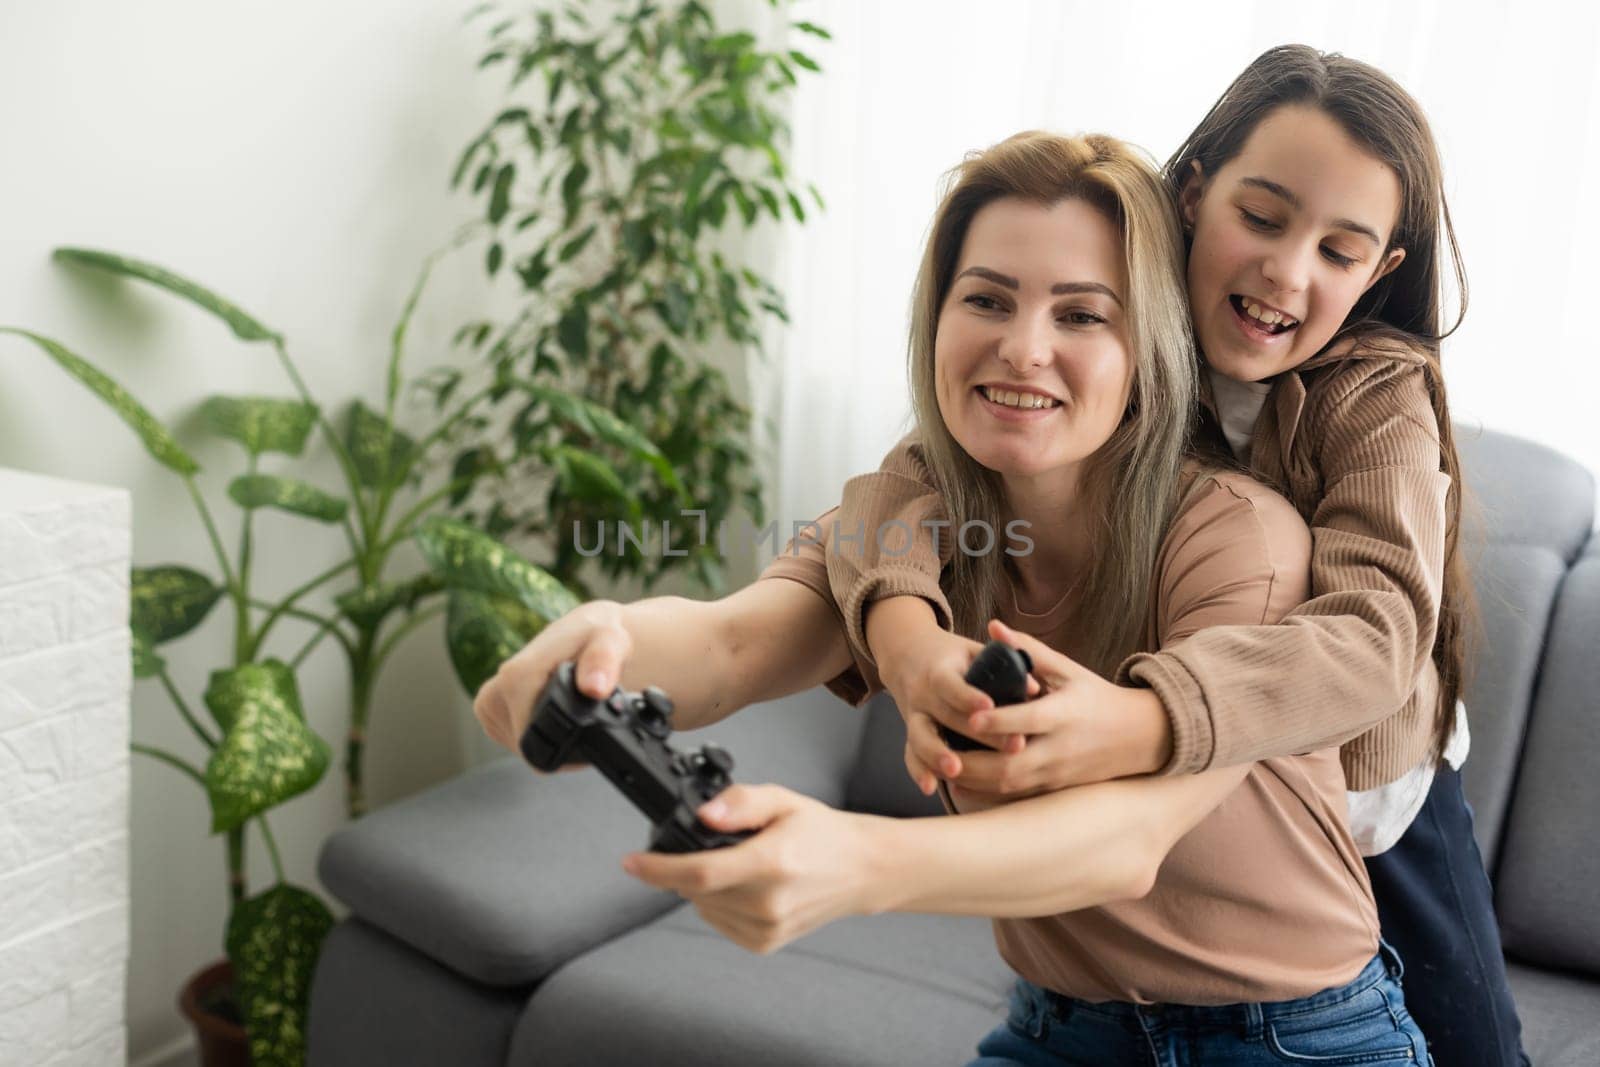 good relationship cute little girl with young mother using joystick playing video game sitting together in living room wooden floor enjoying family holiday.